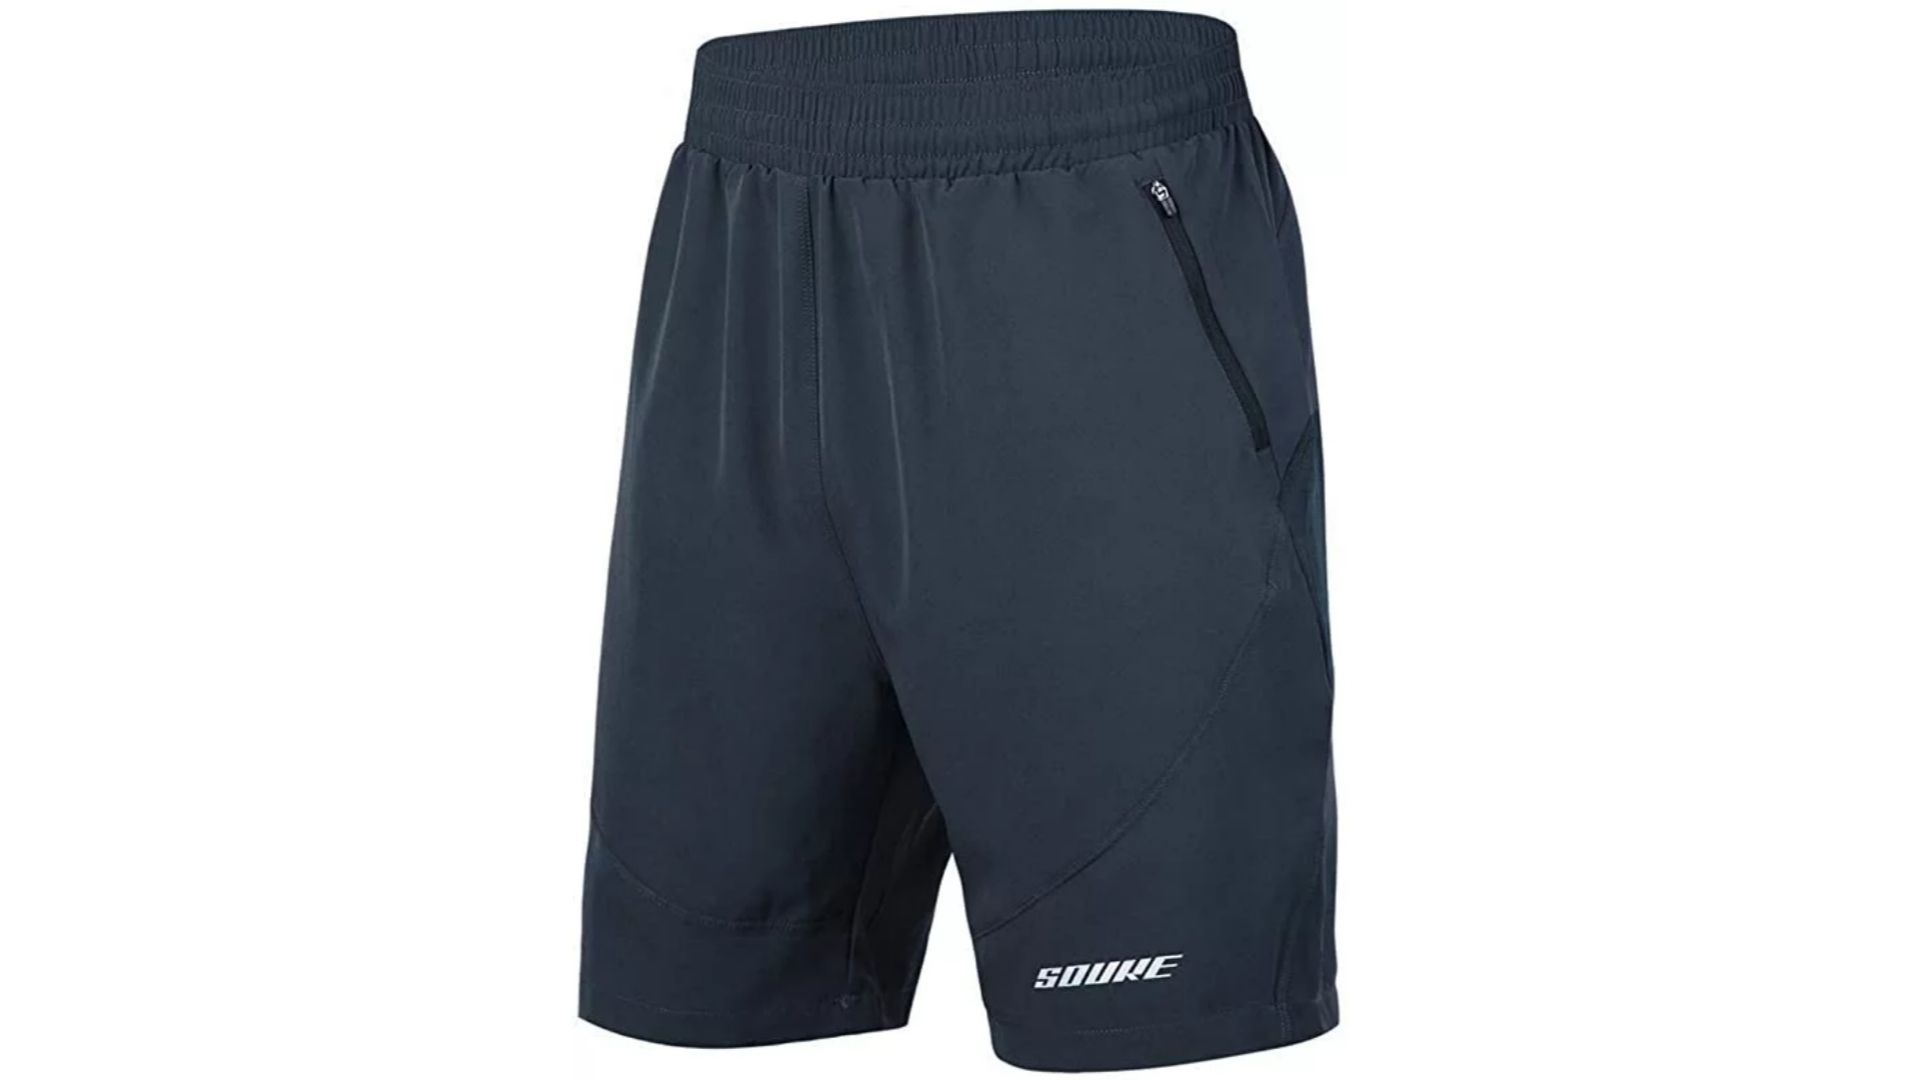 Best Running Shorts for Men (Review & Buying Guide) in 2023